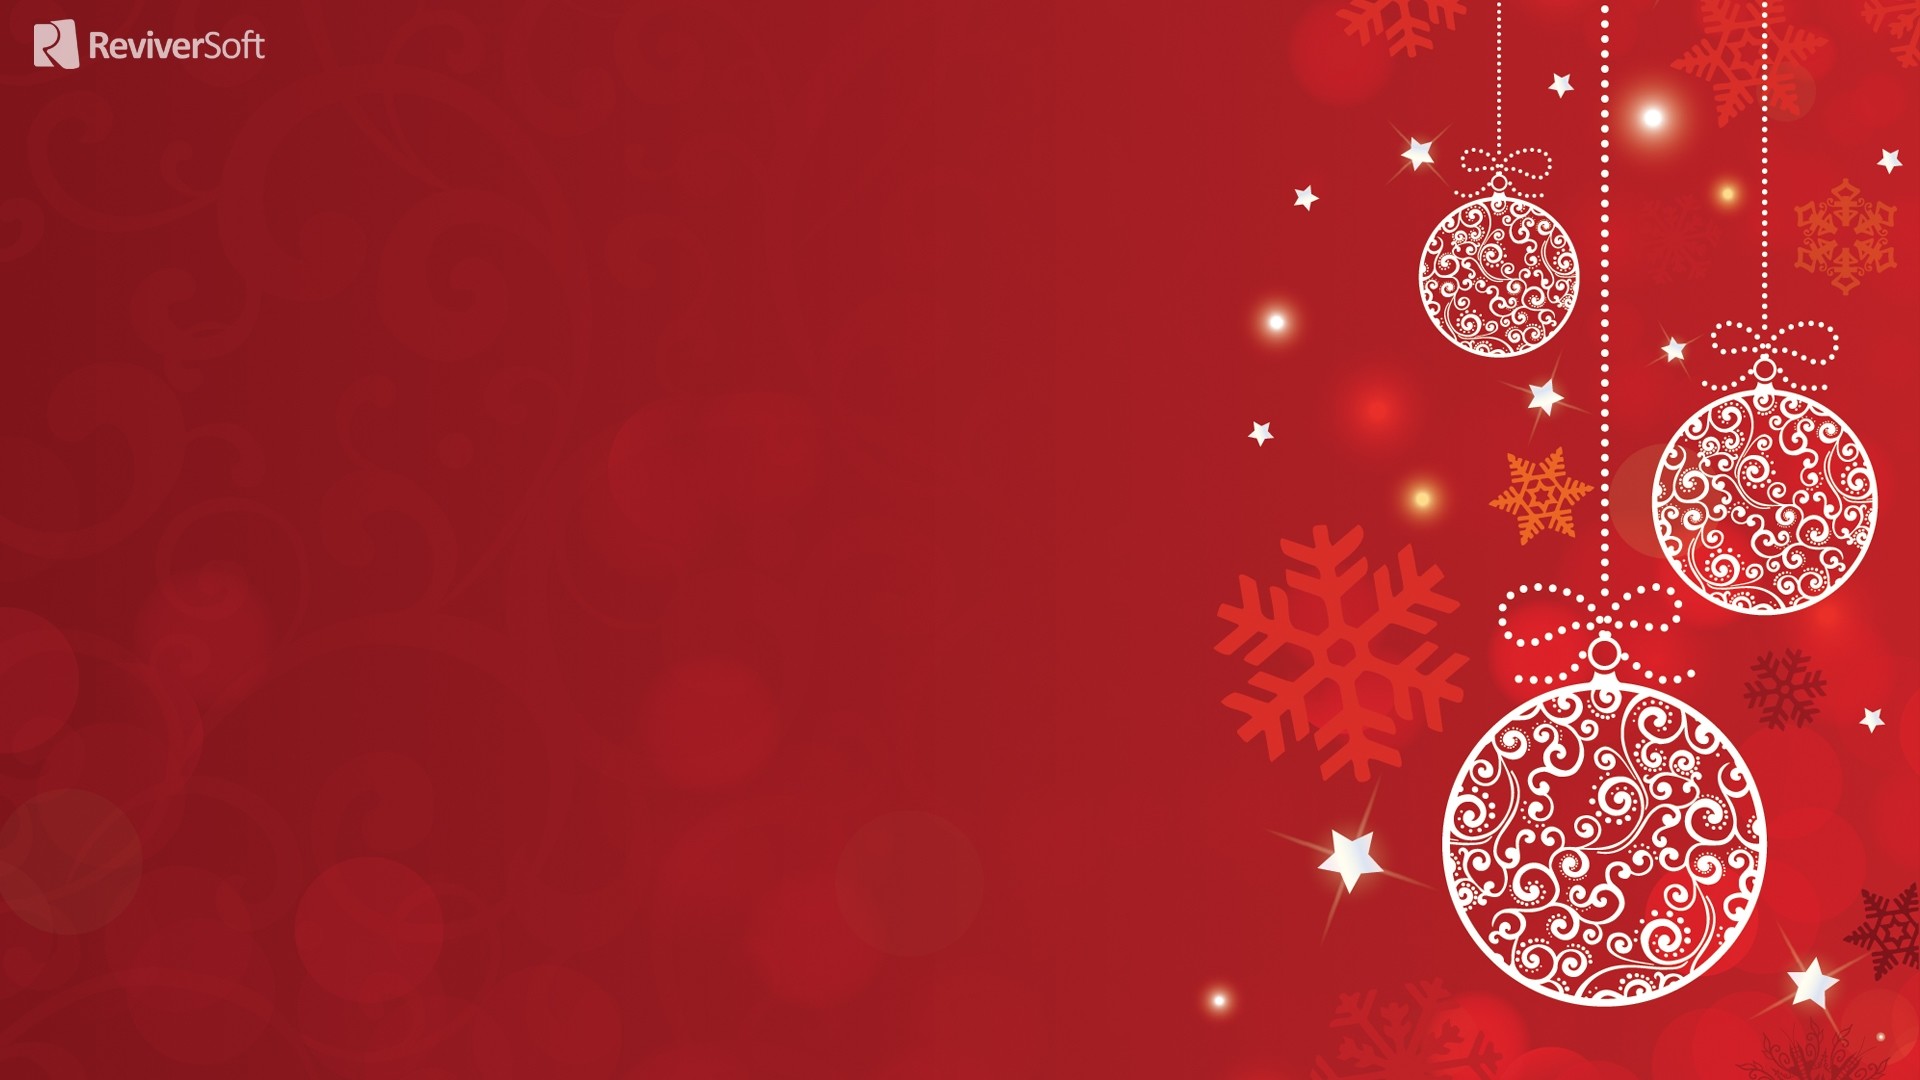 1920x1080 ... backgrounds Red Christmas Wallpaper qiLcfD ...